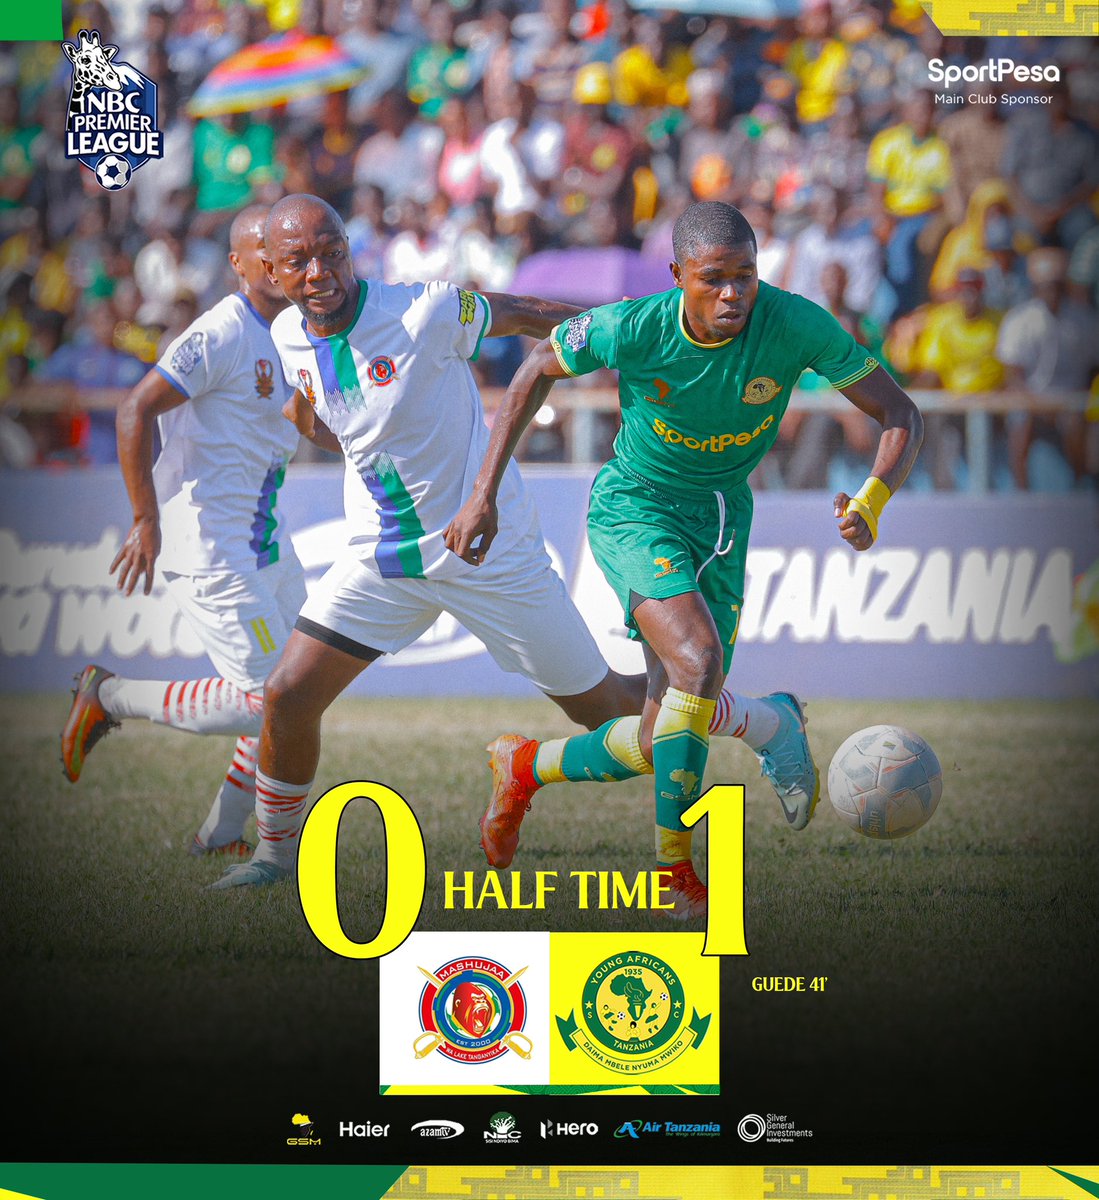 𝐇𝐀𝐋𝐅 𝐓𝐈𝐌𝐄⏱️| #NBCPremierLeague Guede gives us the lead at Lake Tanganyika! ✨

Mashujaa FC 0-1 Young Africans SC

#TheClubAboveAll
#DaimaMbeleNyumaMwiko